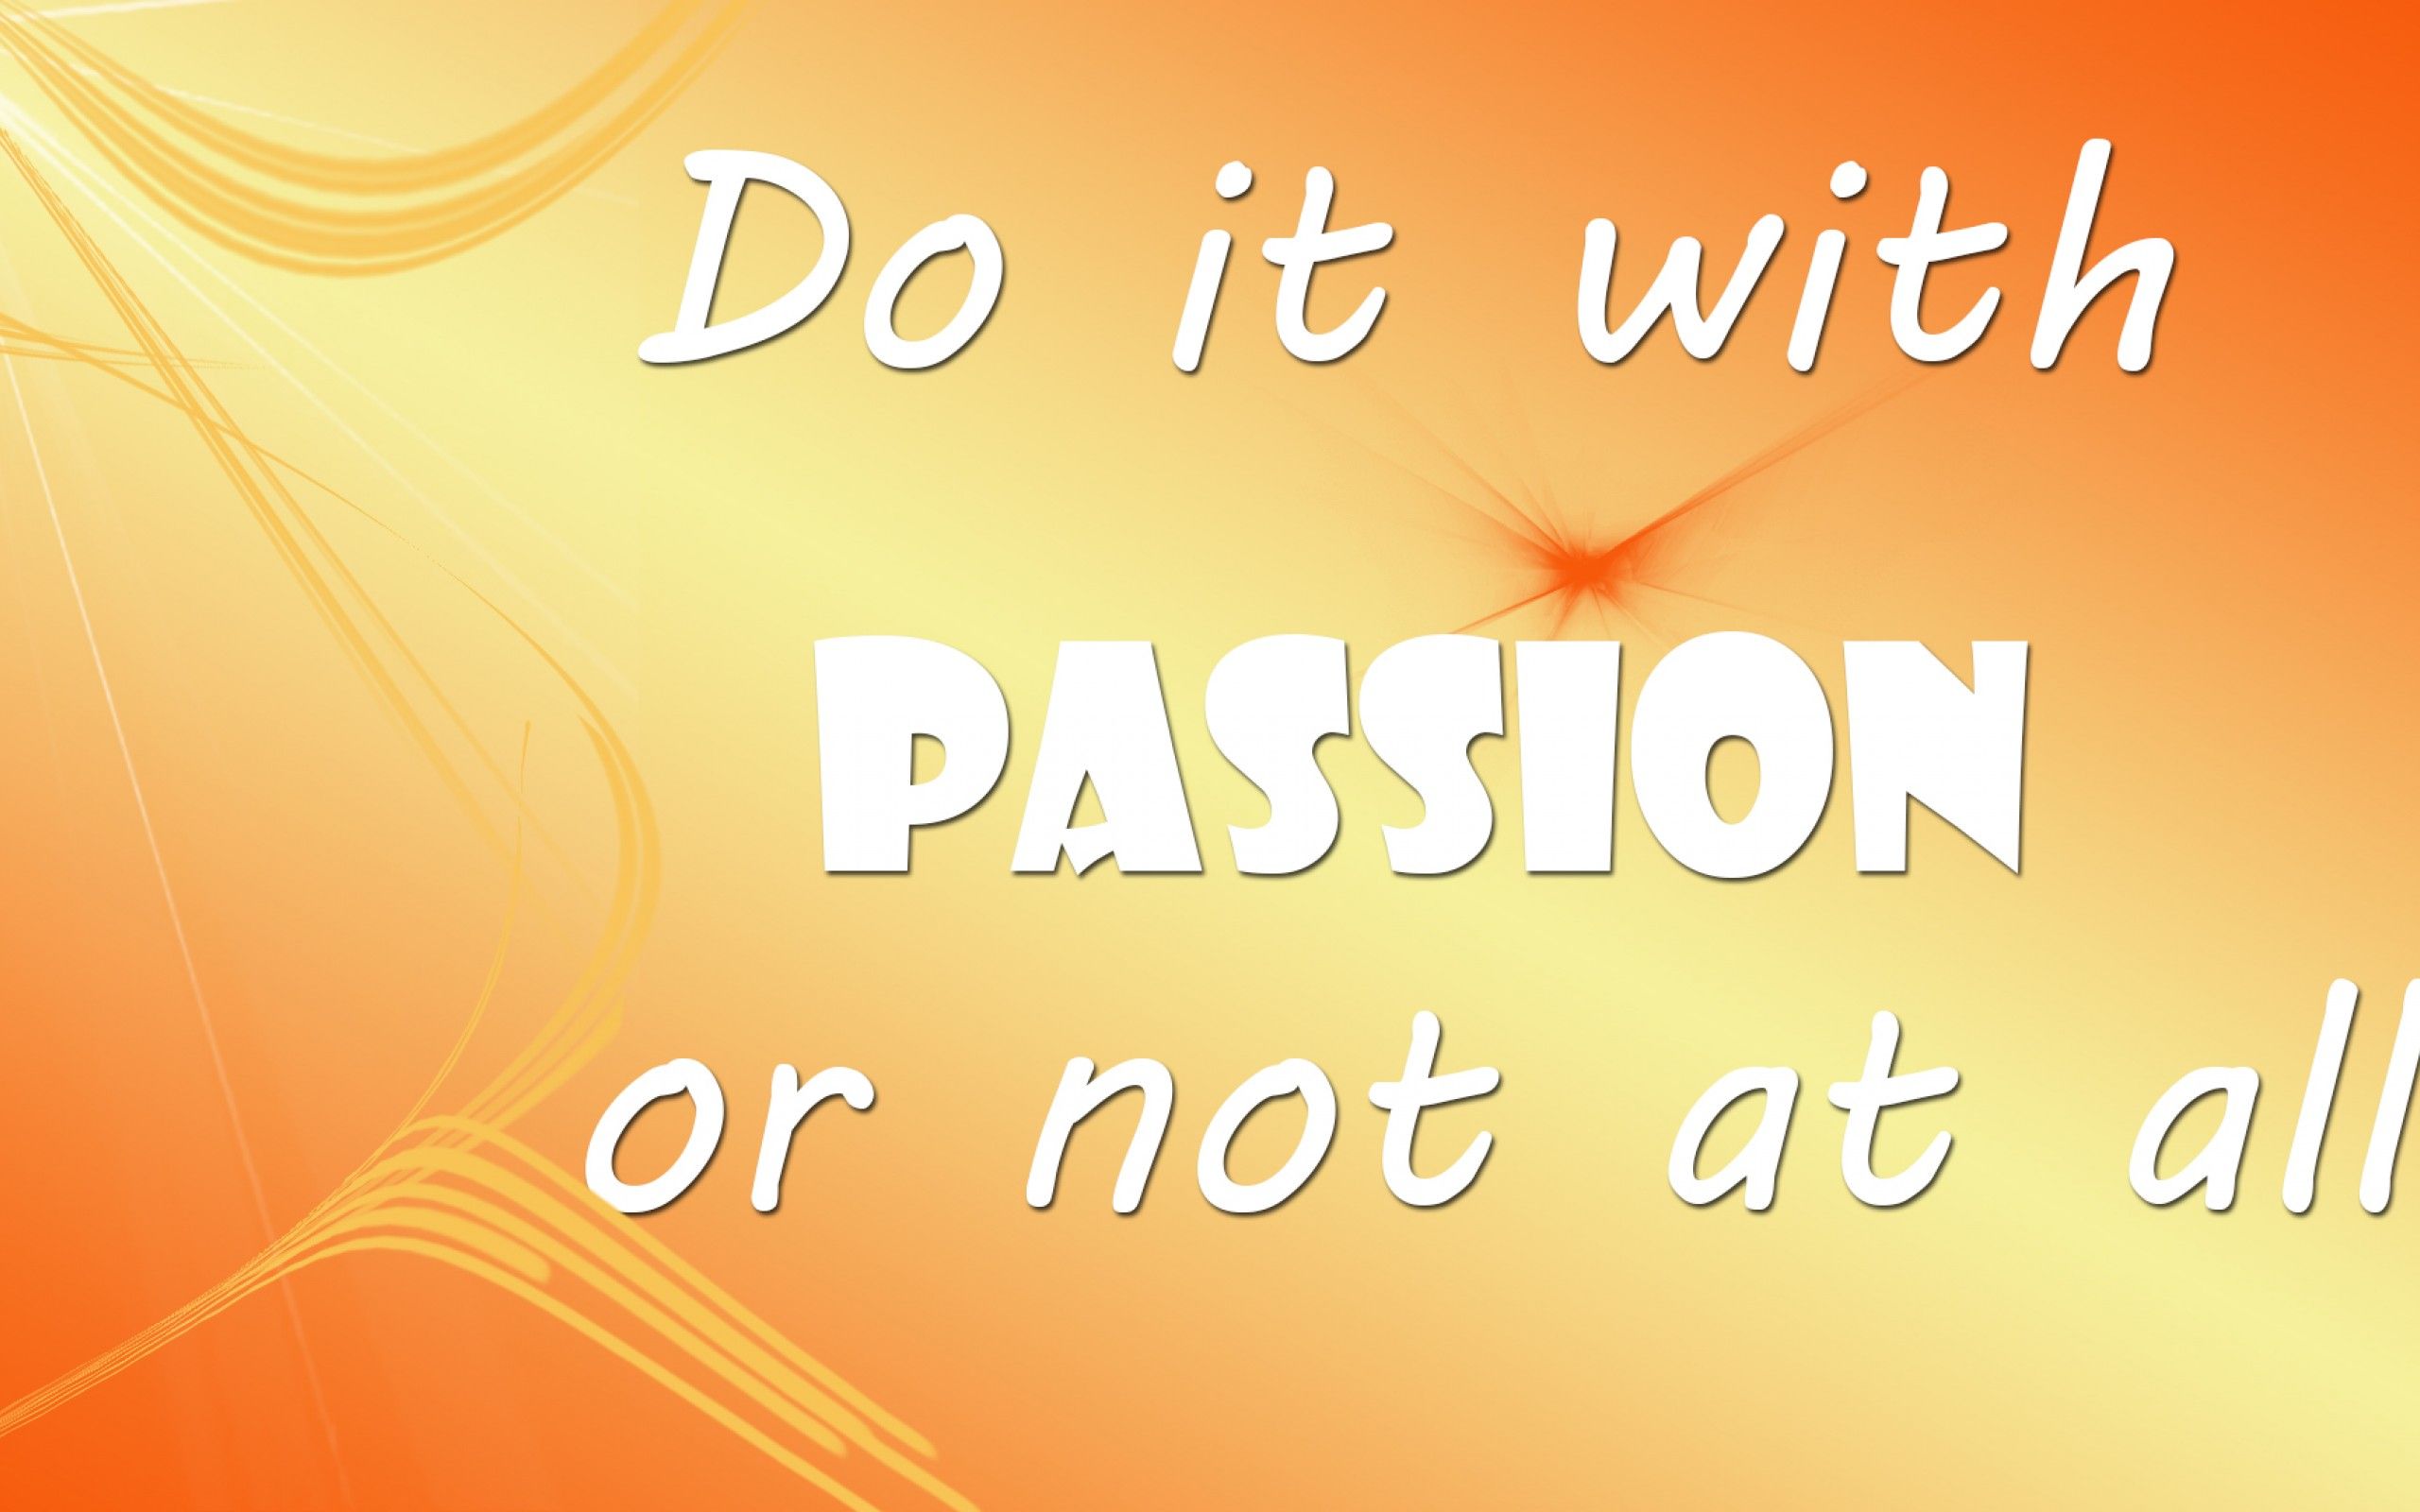 Do it with passion HD Wallpaper 13 Retina Macbook Pro